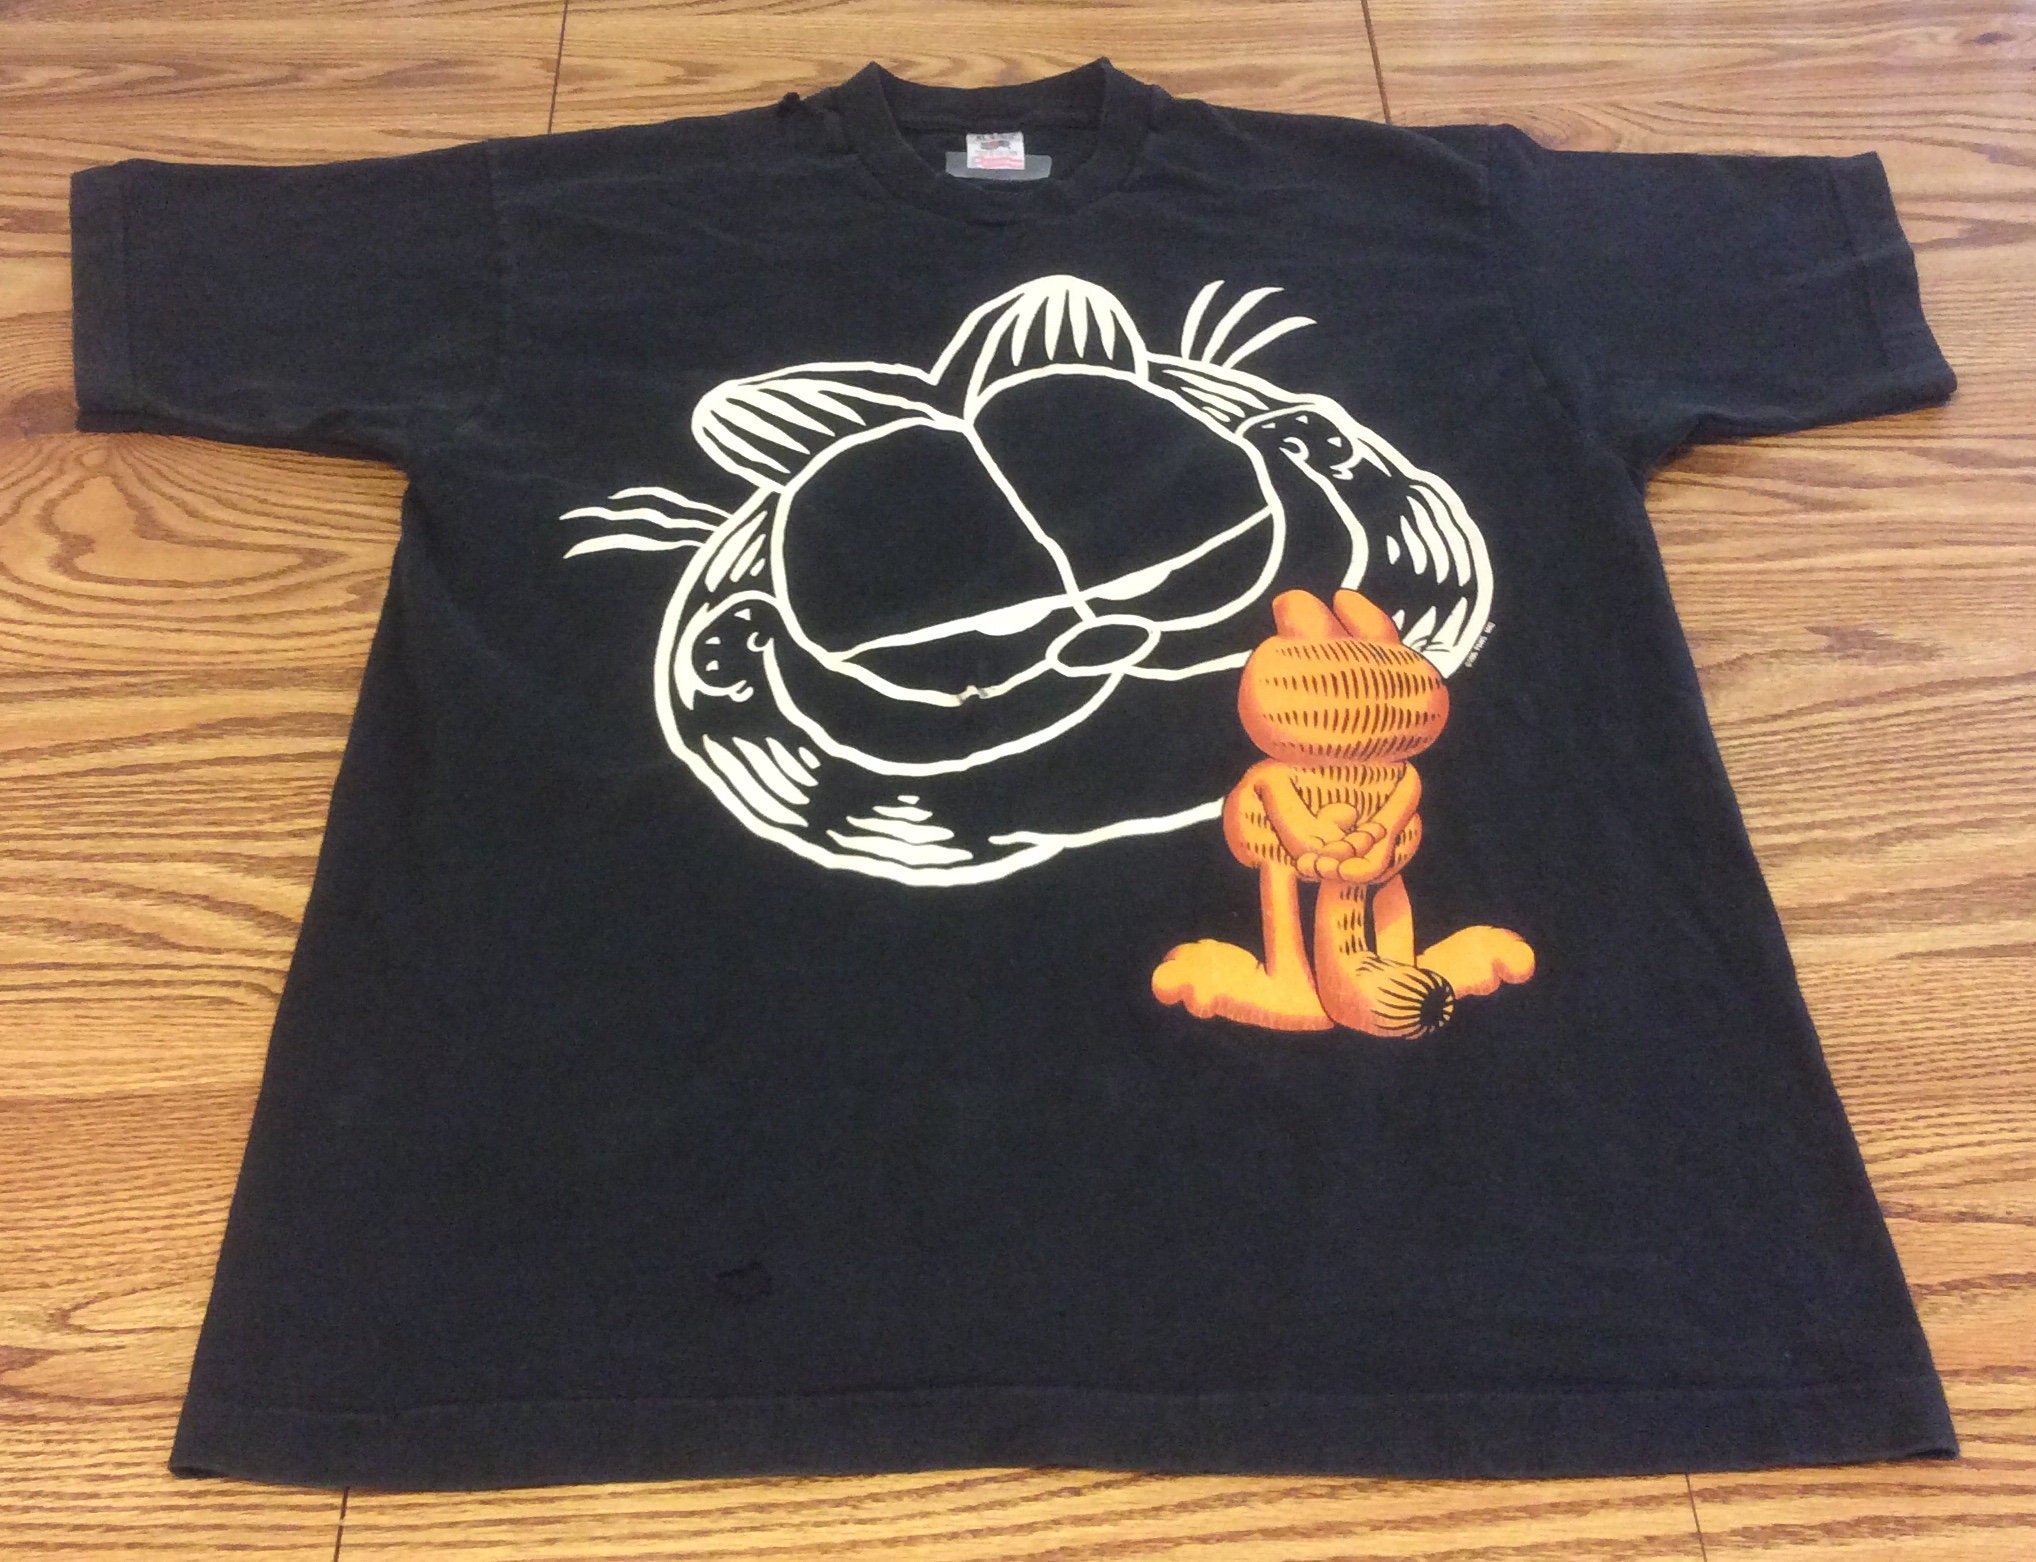 Vintage 1995 Distressed Garfield XL Loom - Single Large Paws of T Etsy Shirt Black Size Graphic Fruit Stitch Print the